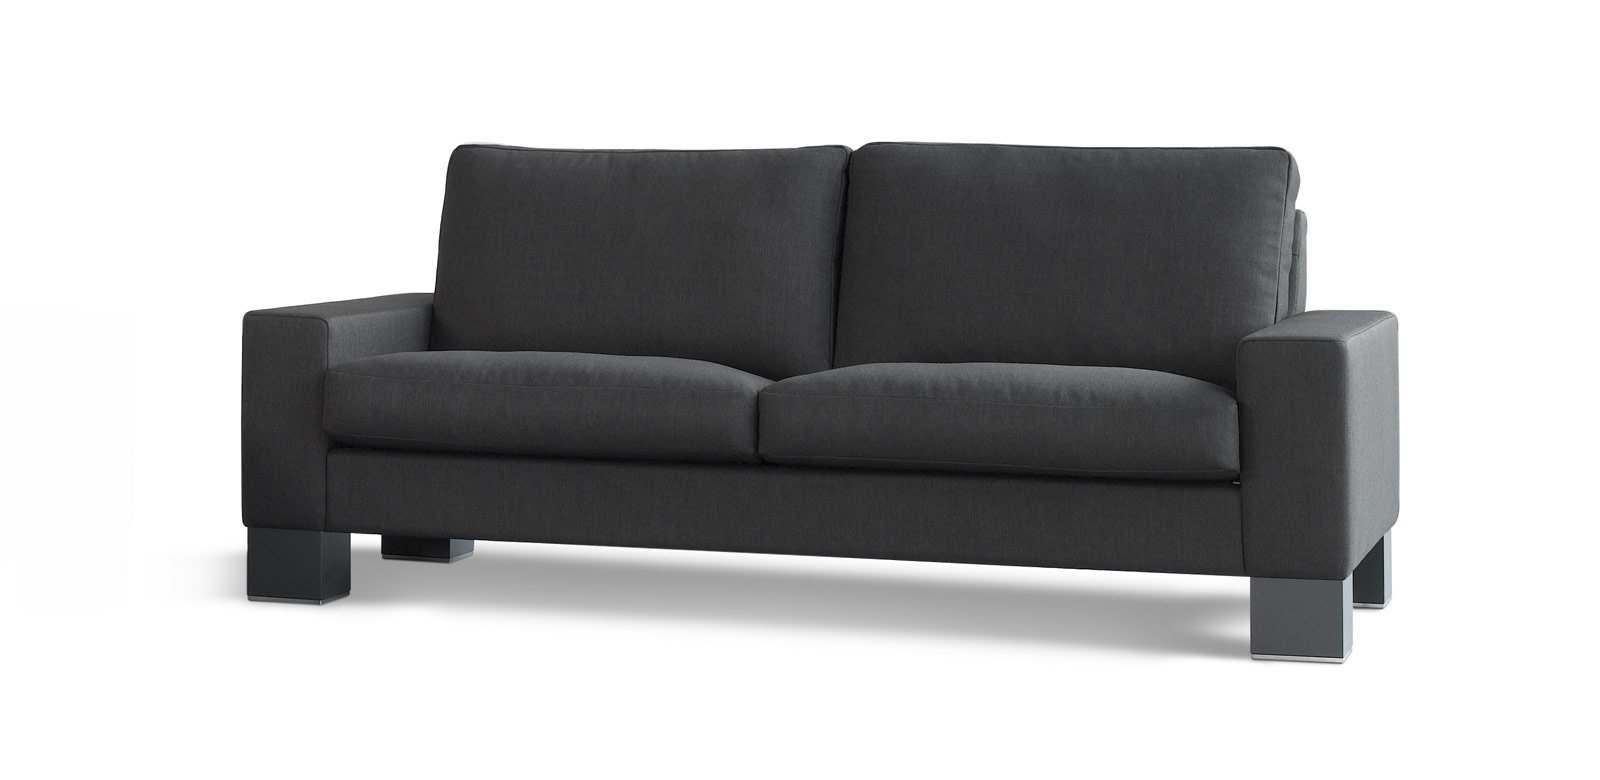 Black leather couch CL500 on block-like legs